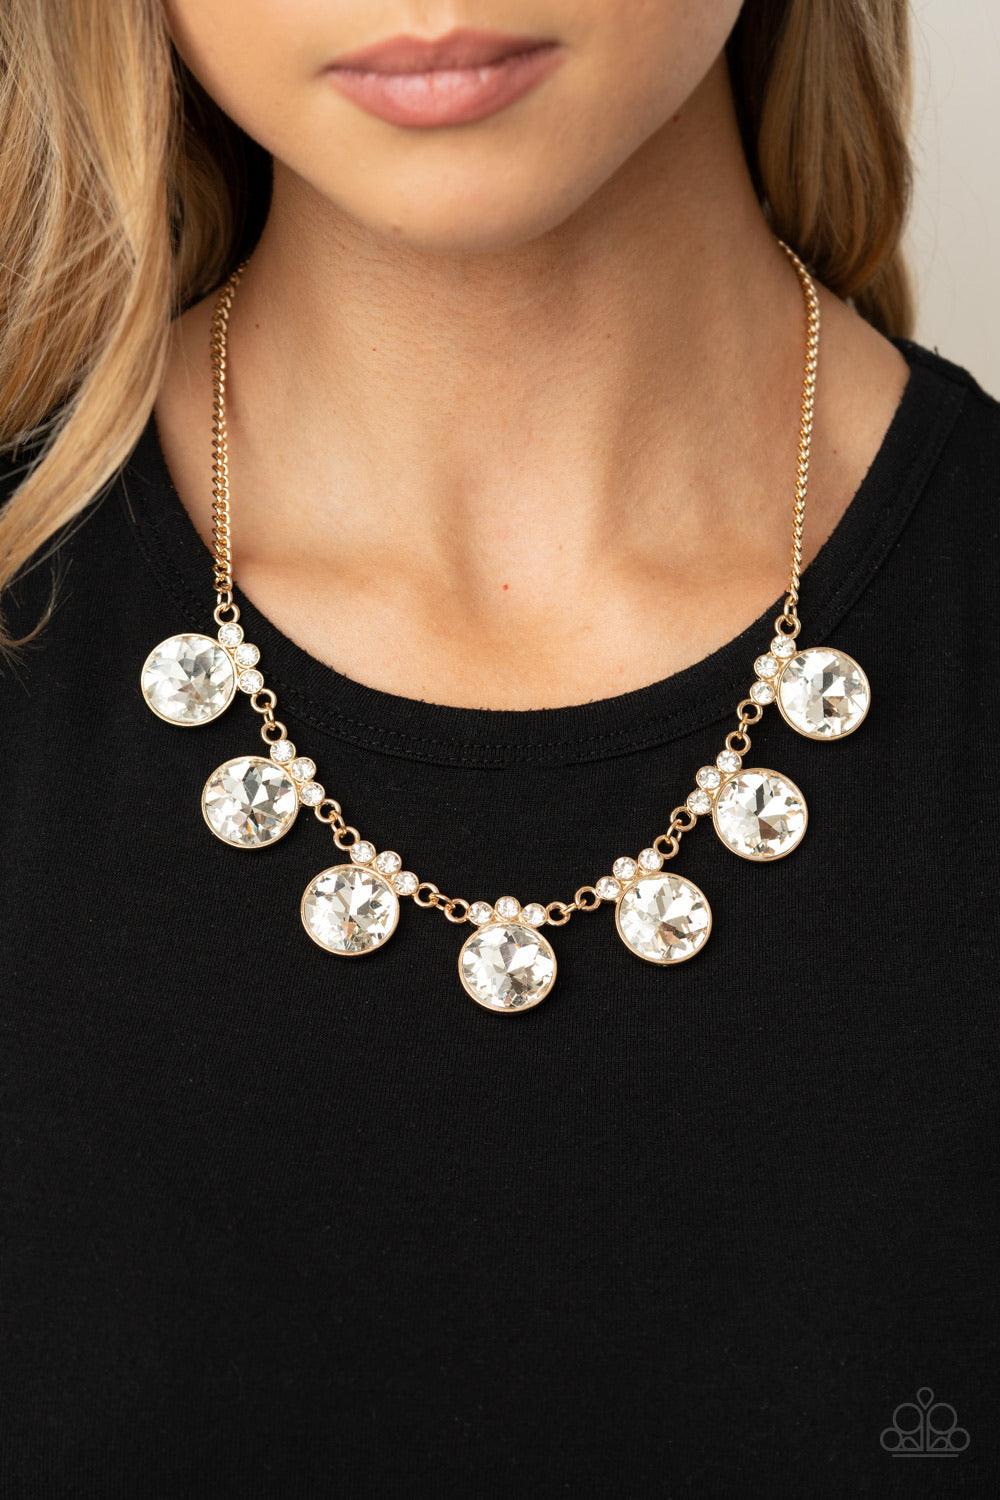 Paparazzi Accessories GLOW-Getter Glamour - Gold Crowned in a trio of dainty white rhinestones, an exaggerated display of oversized white gems delicately link below the collar for a glamorous glow. Features an adjustable clasp closure. Sold as one individ